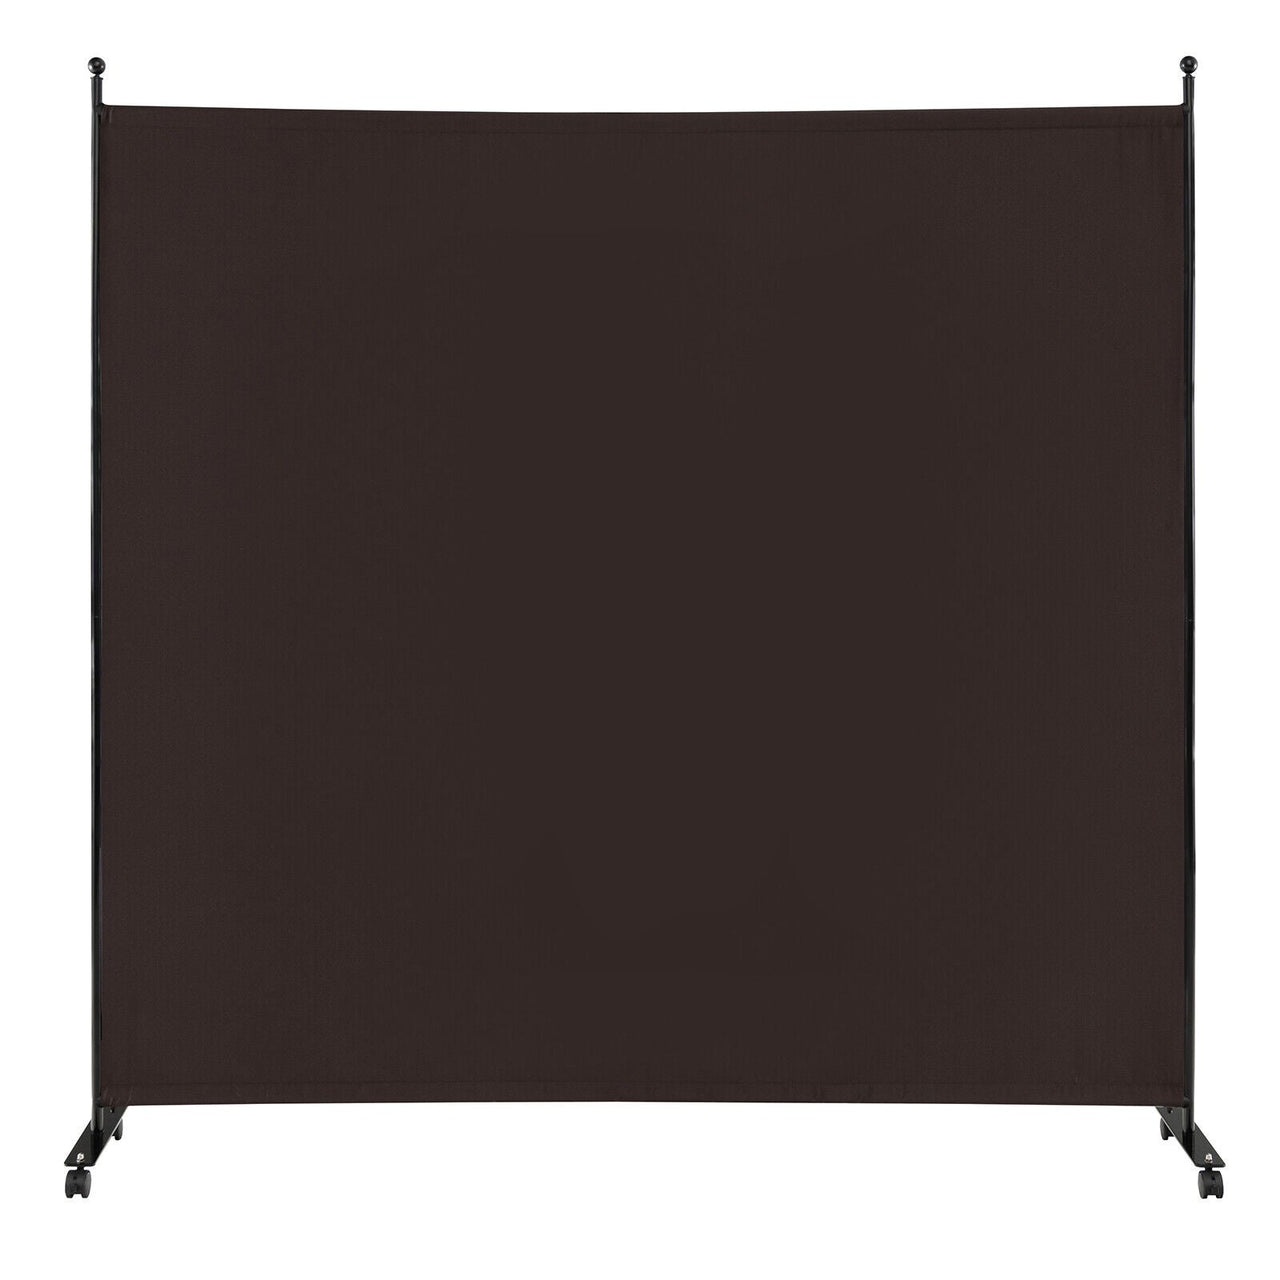 6 Feet Single Panel Rolling Room Divider with Smooth Wheels